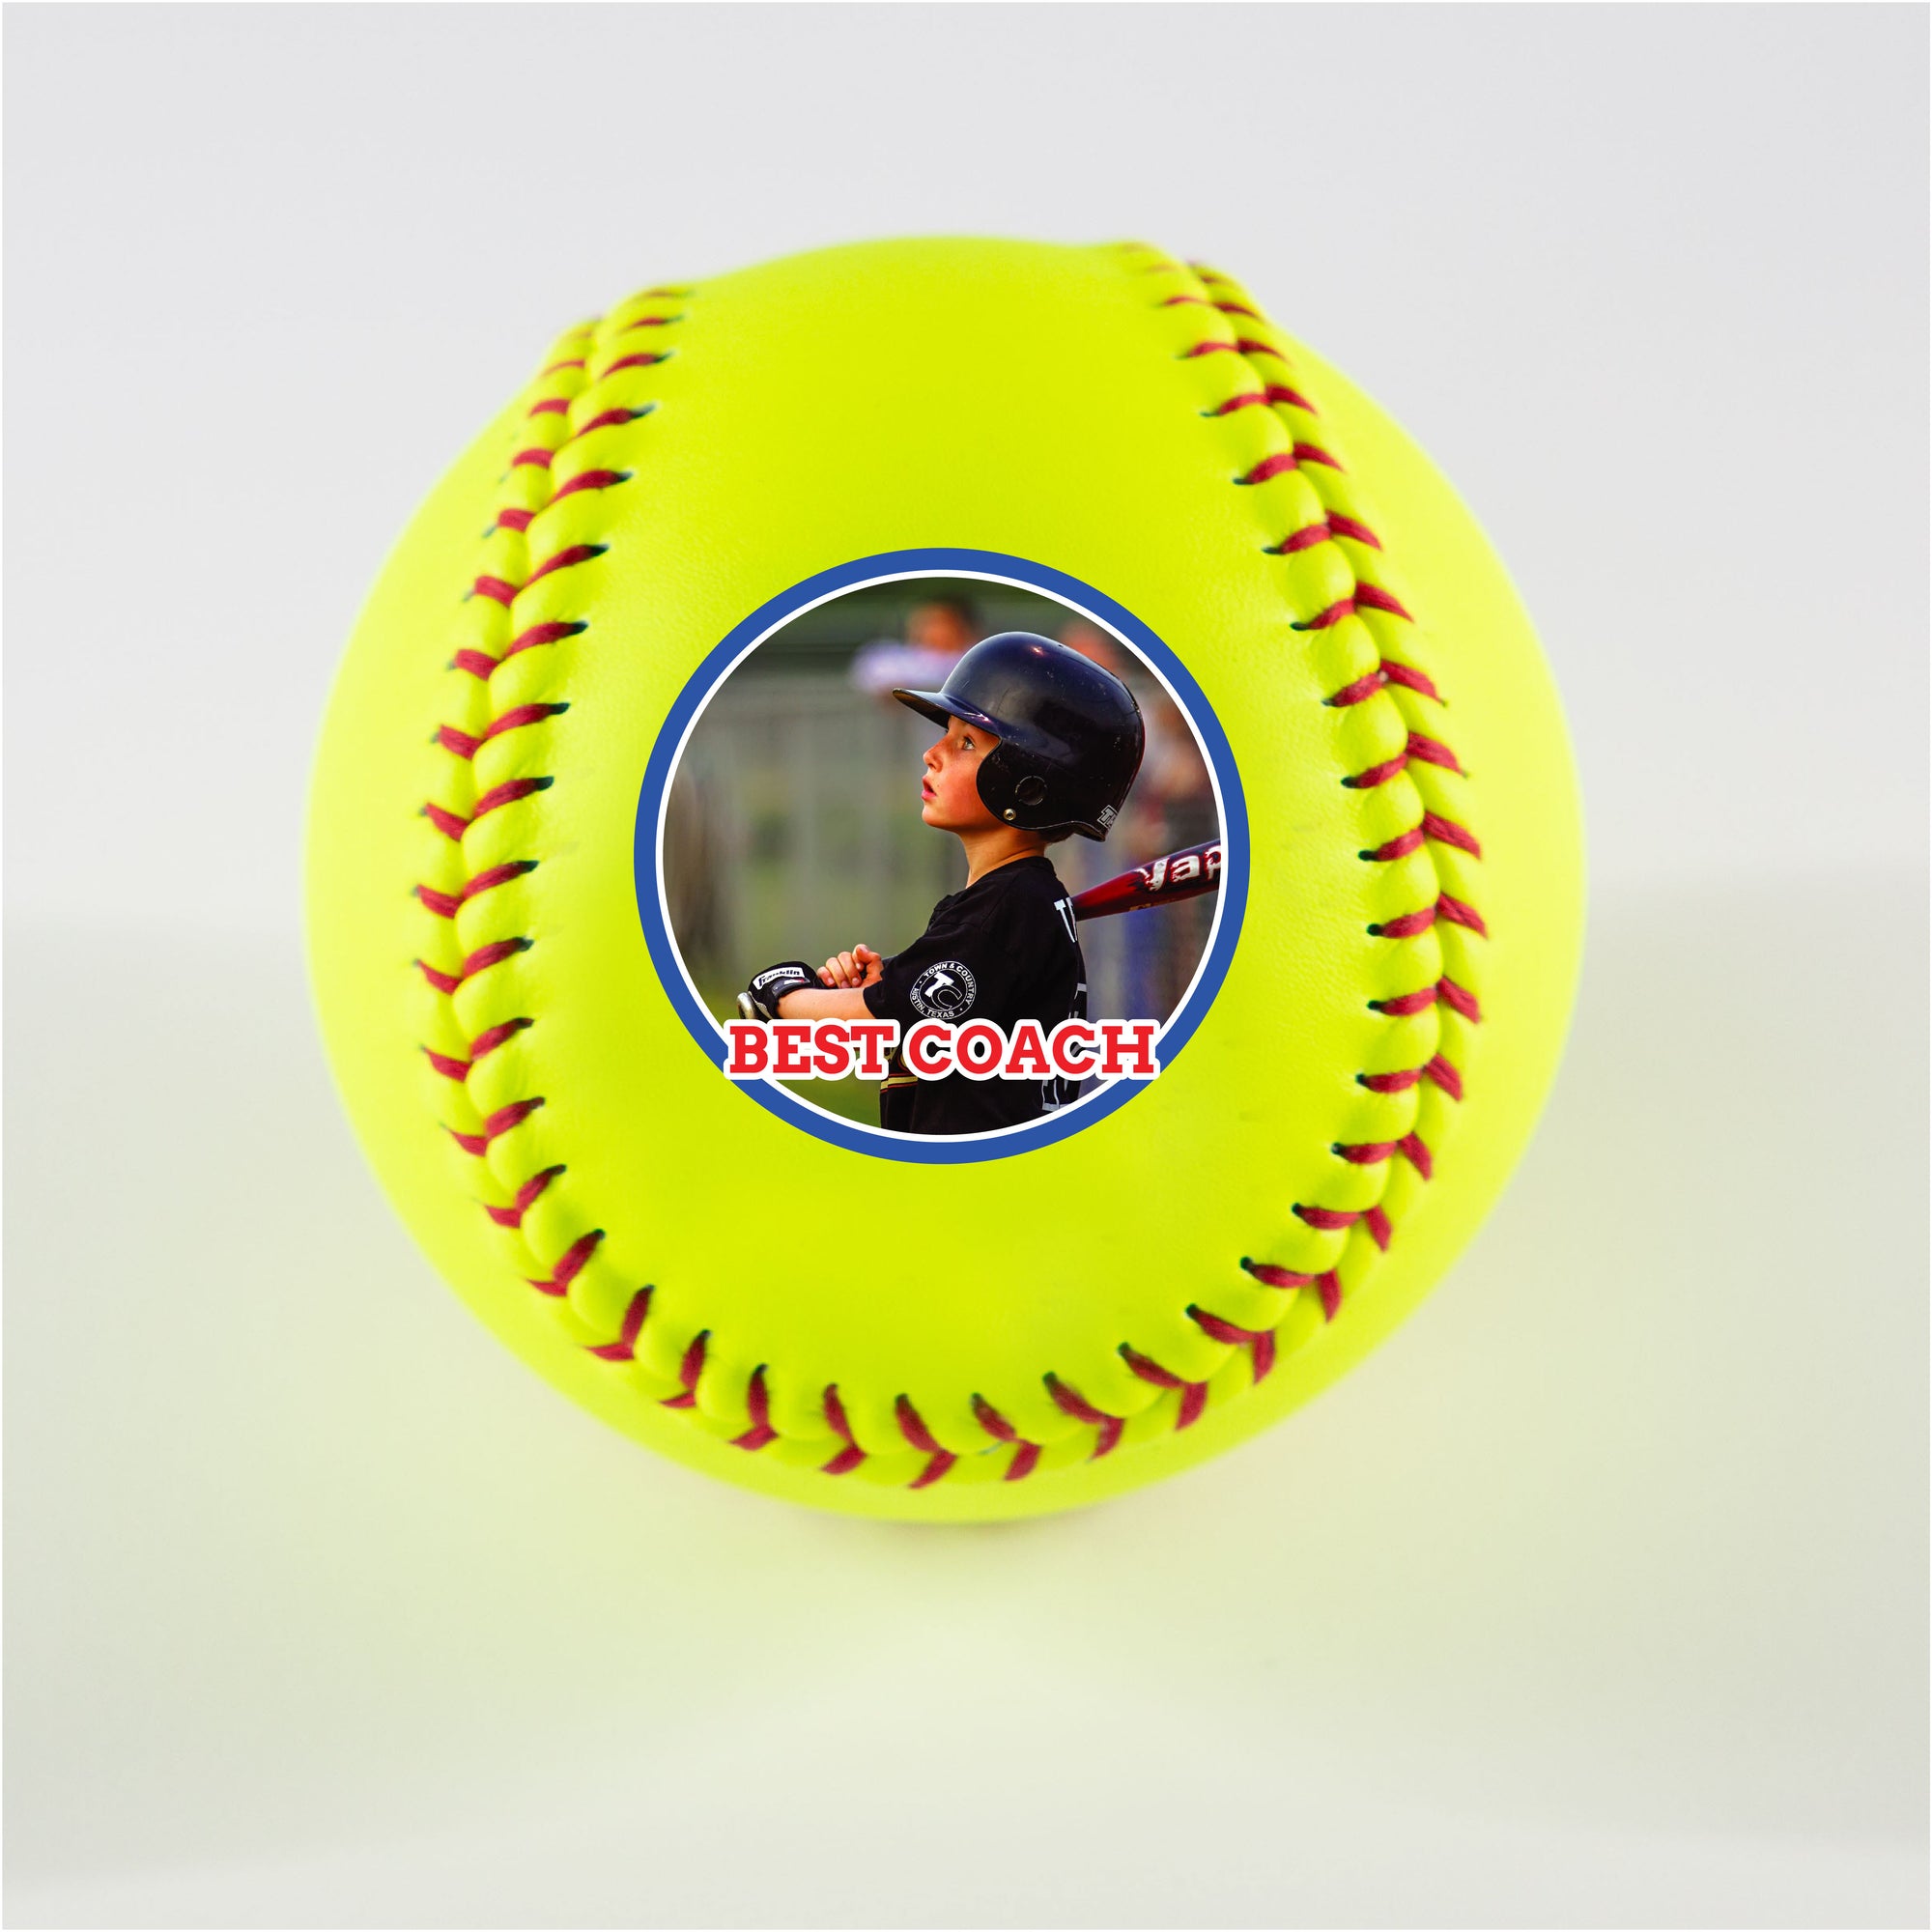 Printed Softball with Circle Best Coach Photo Design